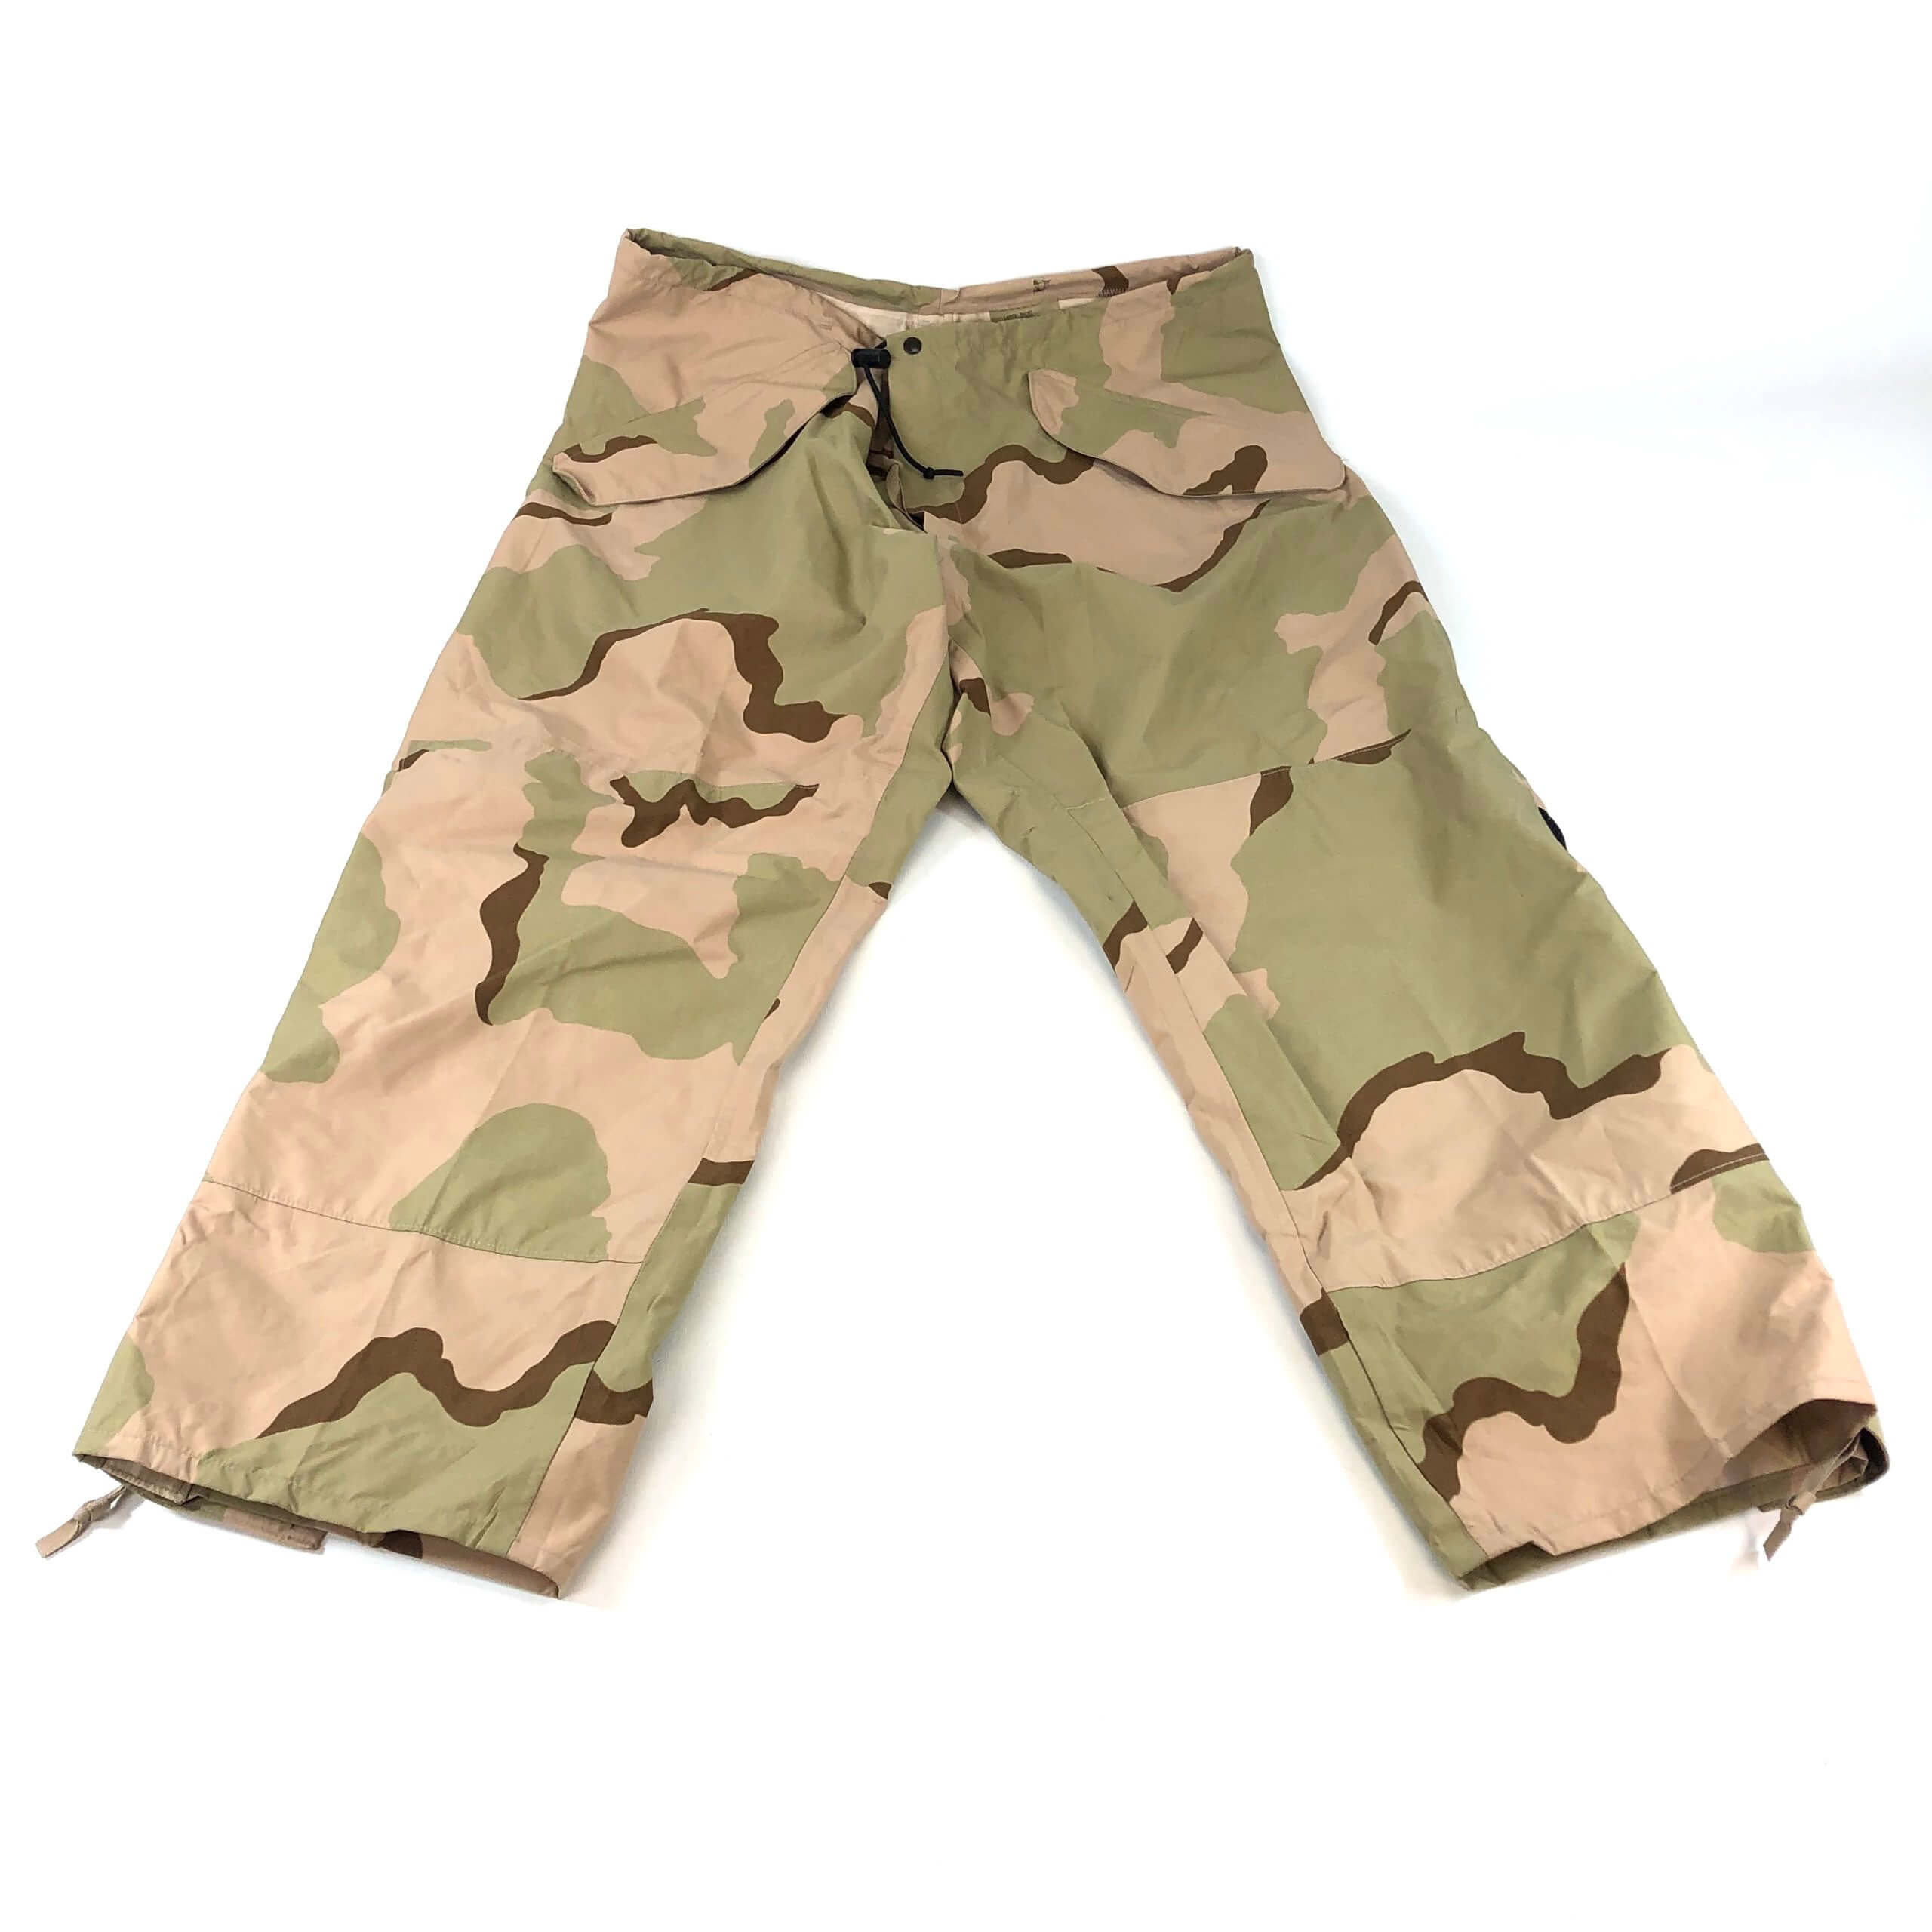 Army Goretex Cold Weather Camouflage Military Hunting Waterproof Pants M Short